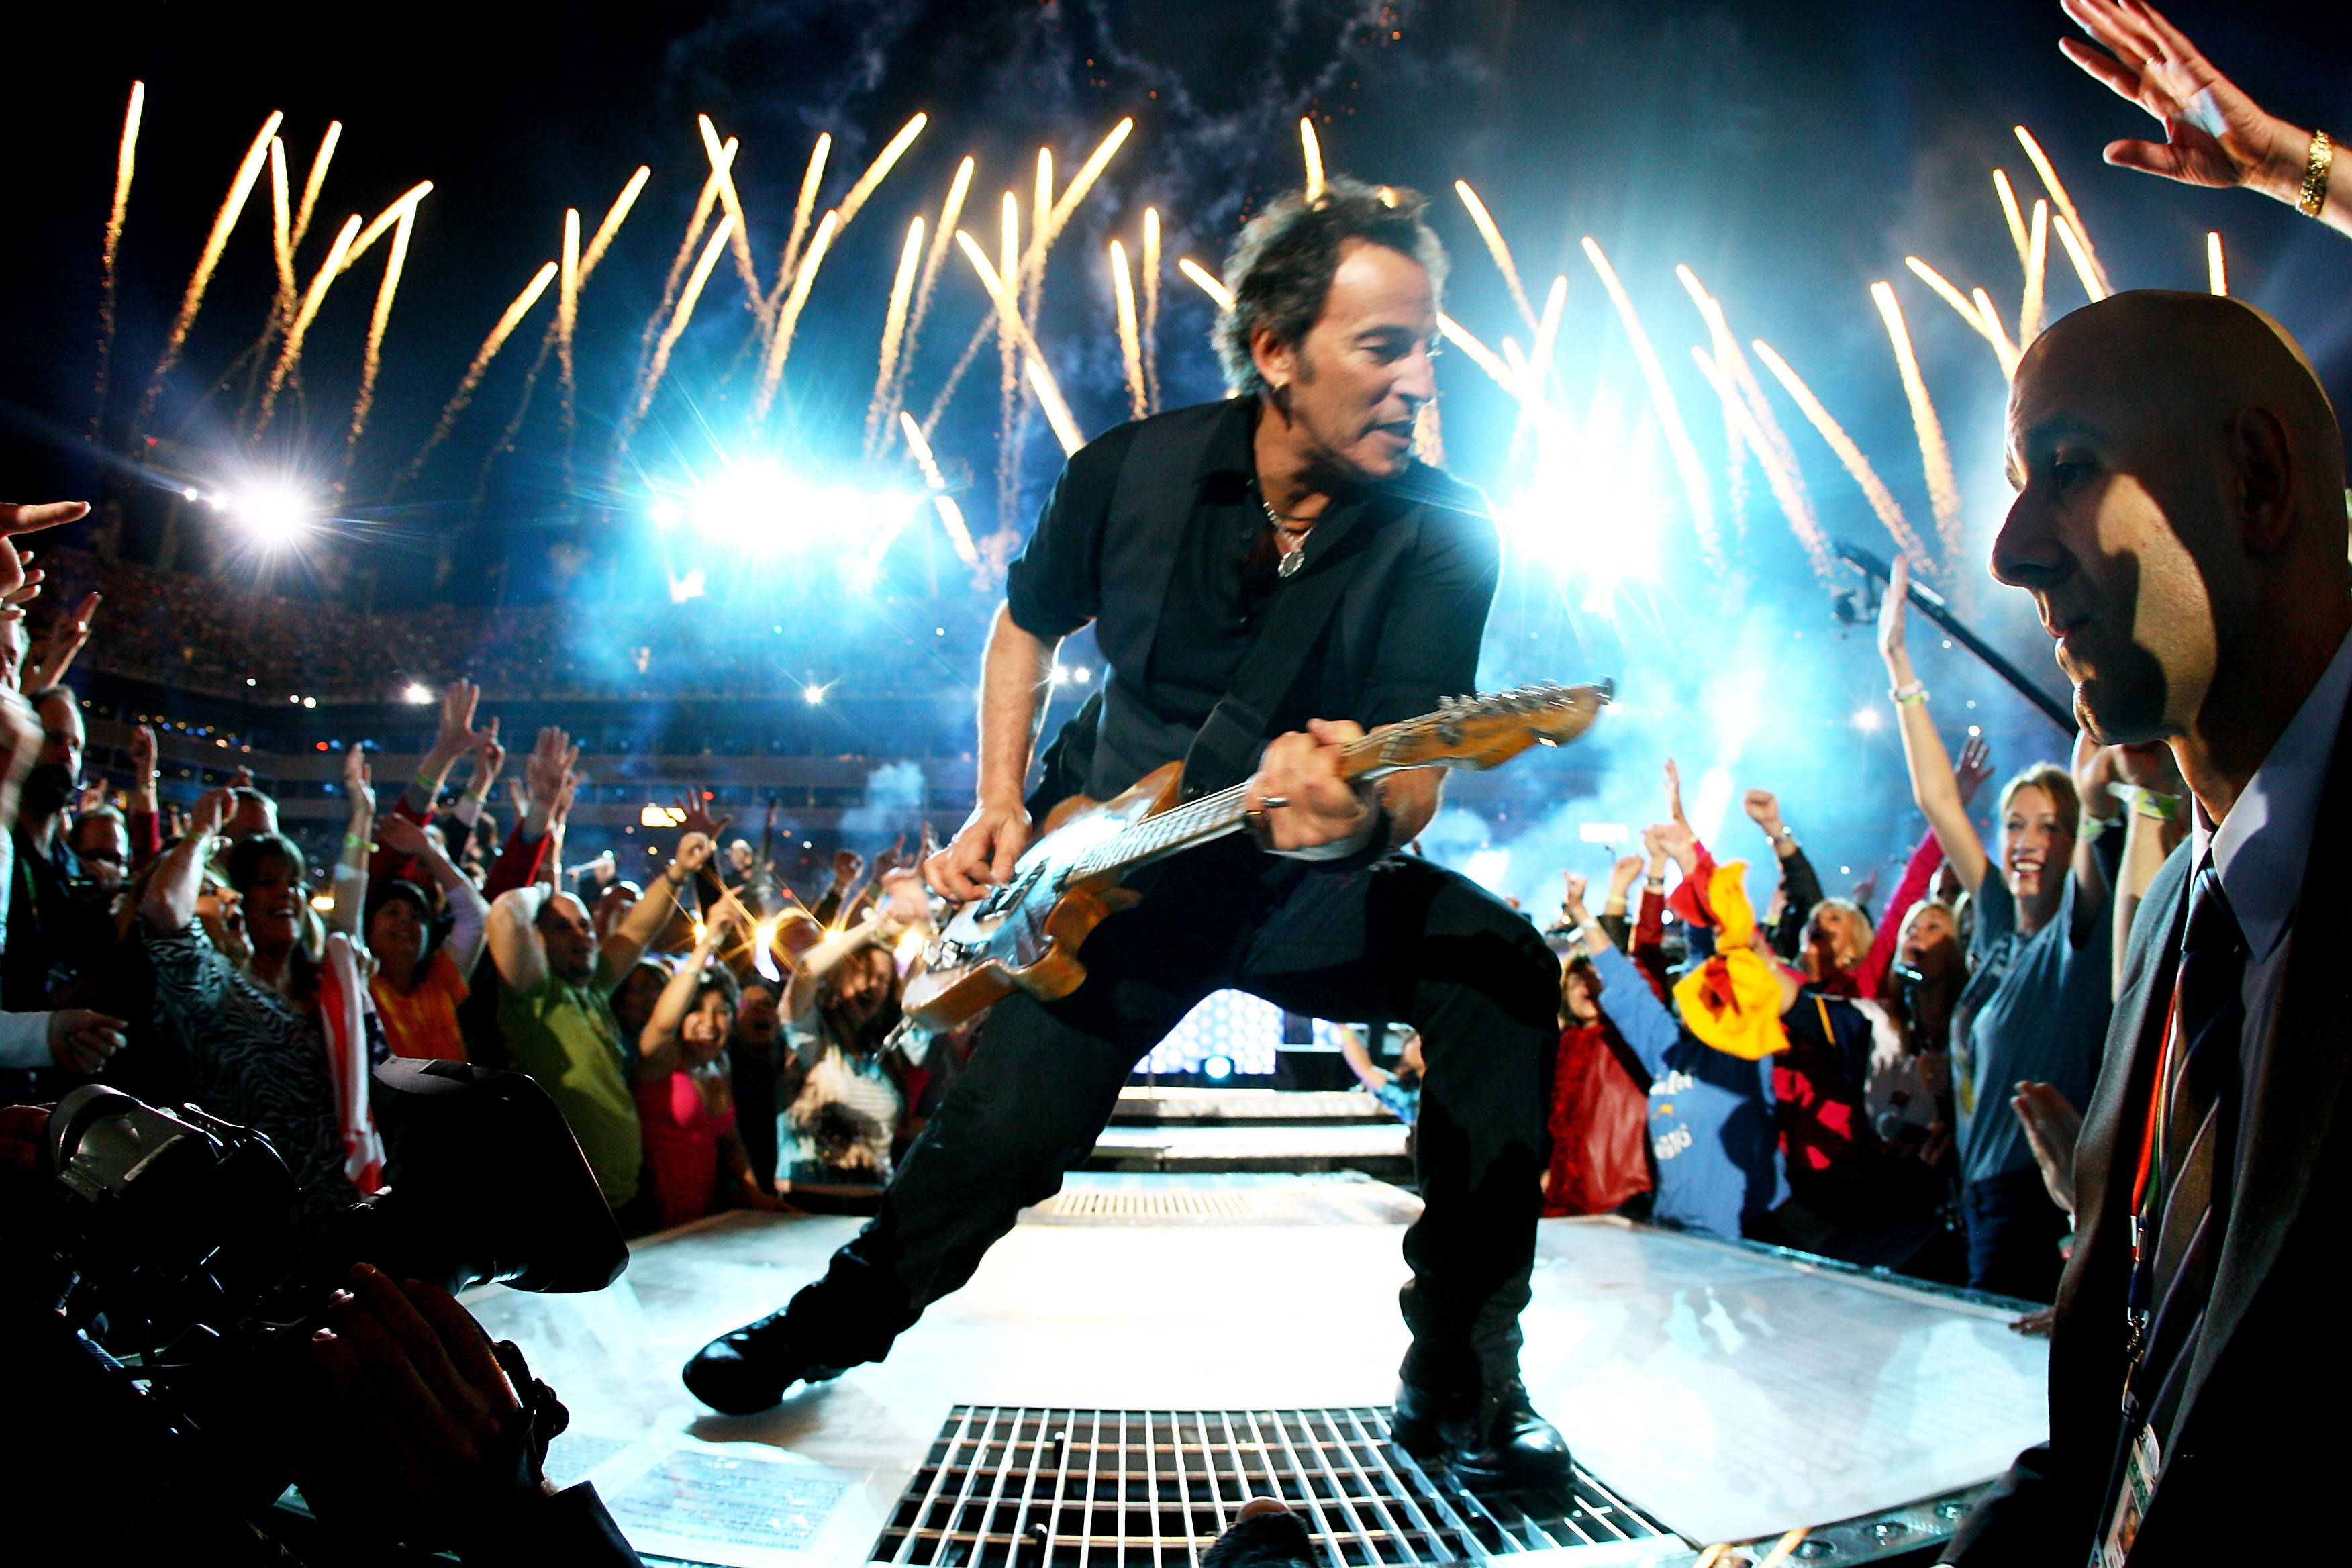 BRUCE SPRINGSTEEN WALLPAPERS FREE Wallpapers Background images 3504x2336